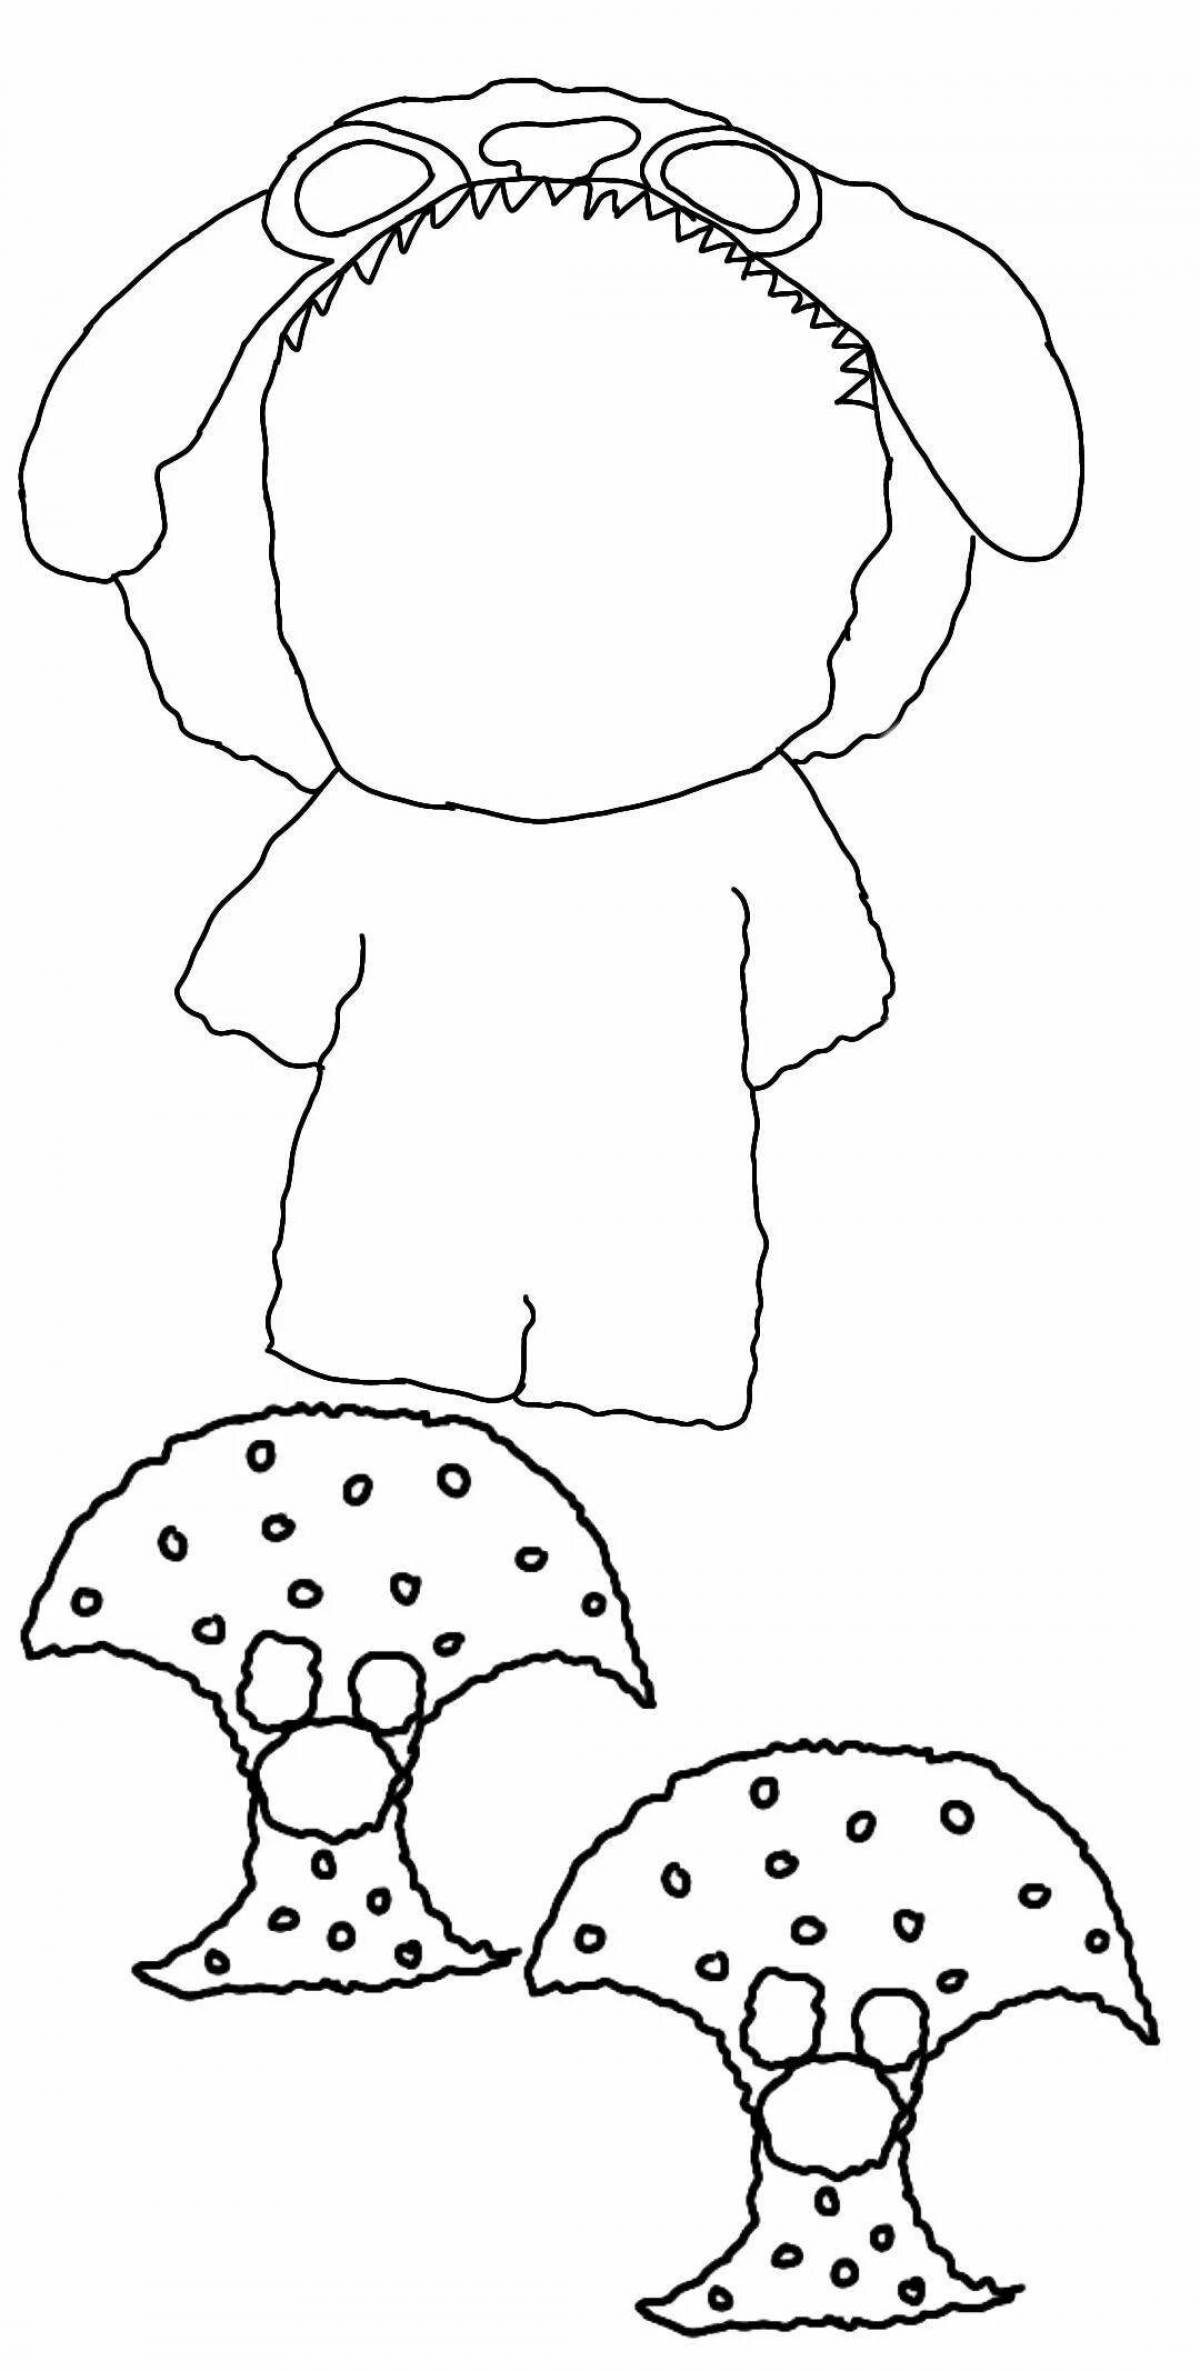 Amazing paper duck clothes coloring page lalafanfan